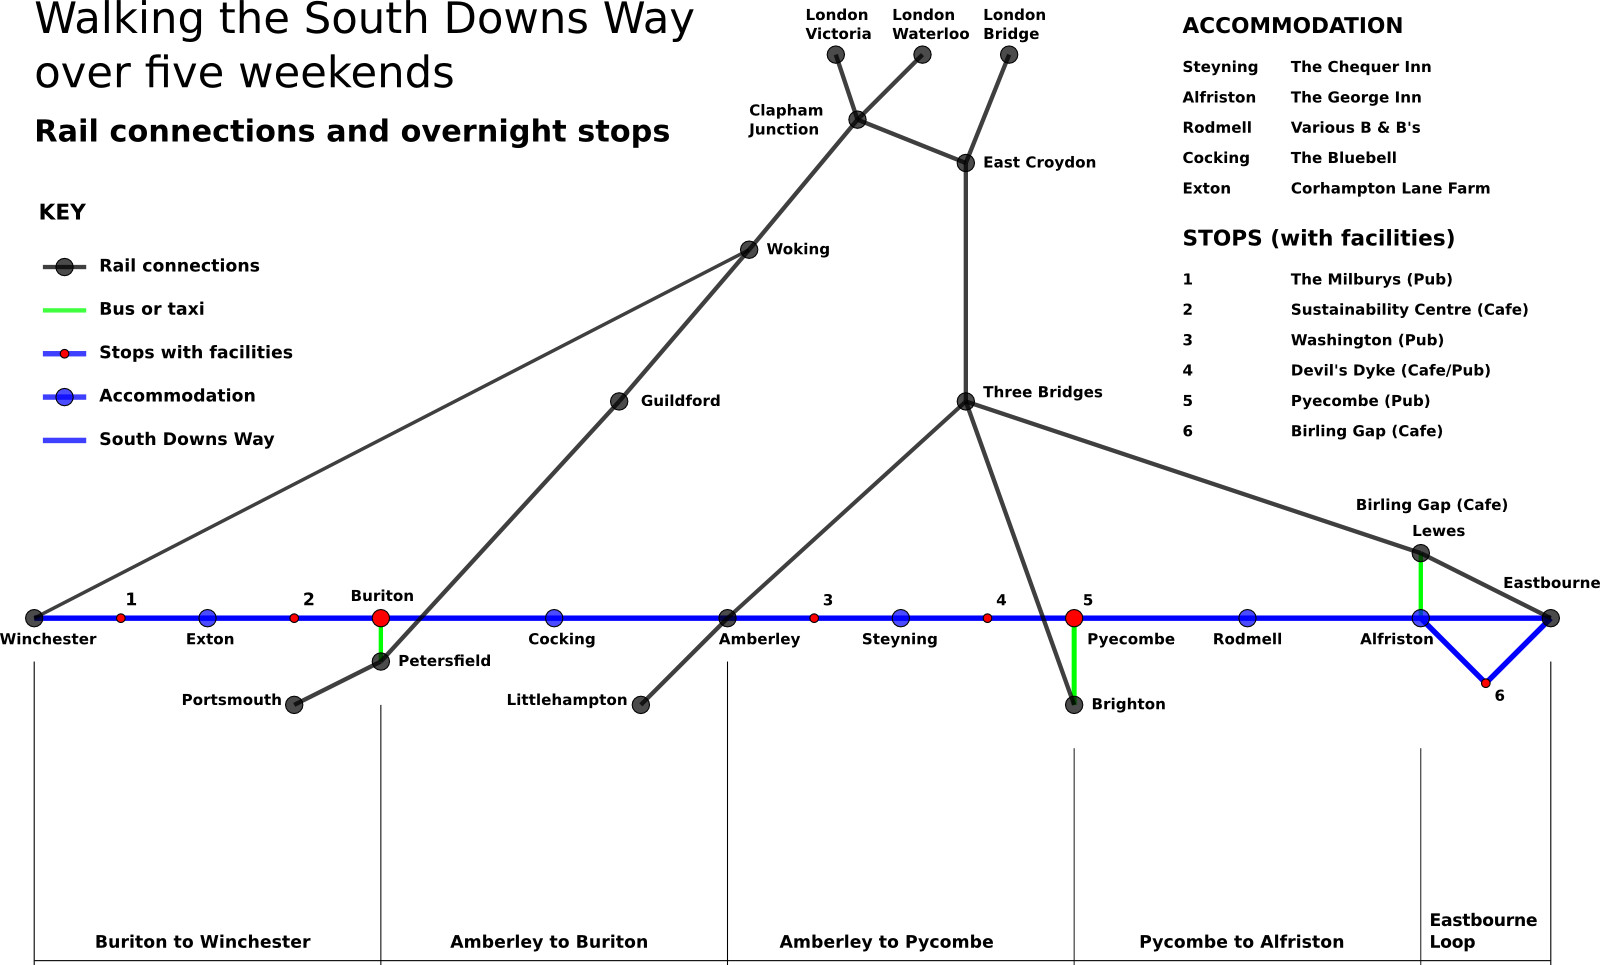 Rail connections and overnight stops